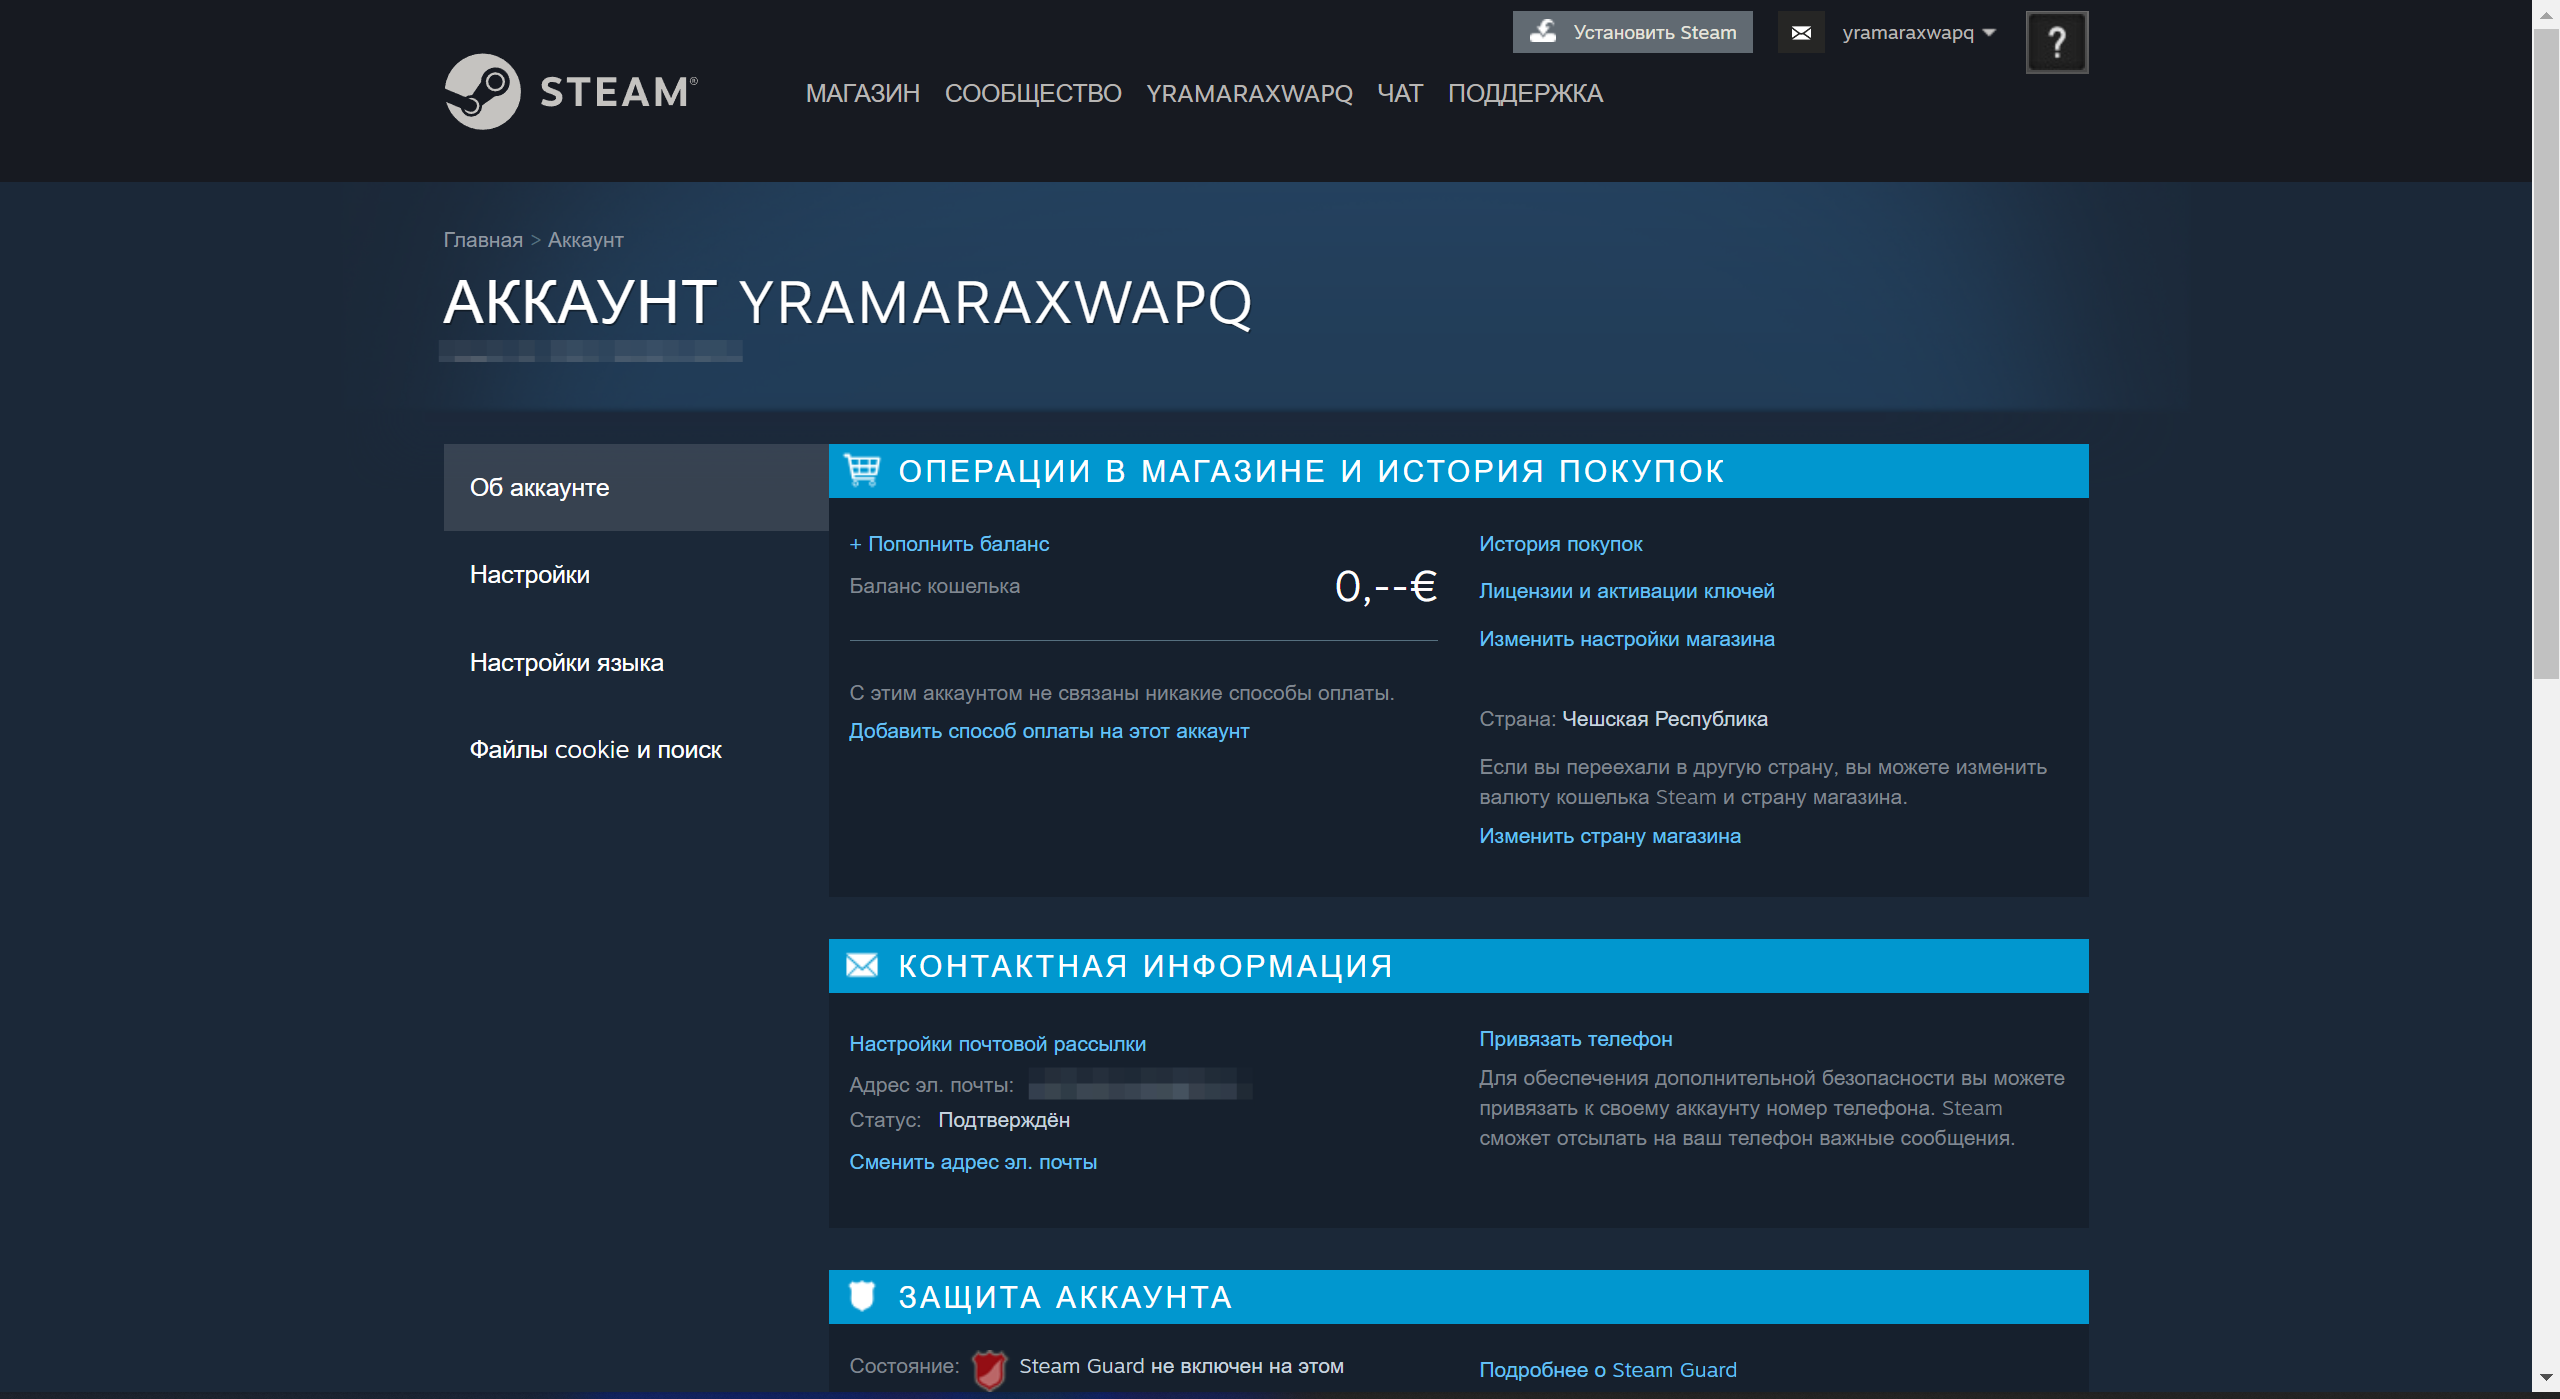 You are not currently logged in to a steam account фото 76